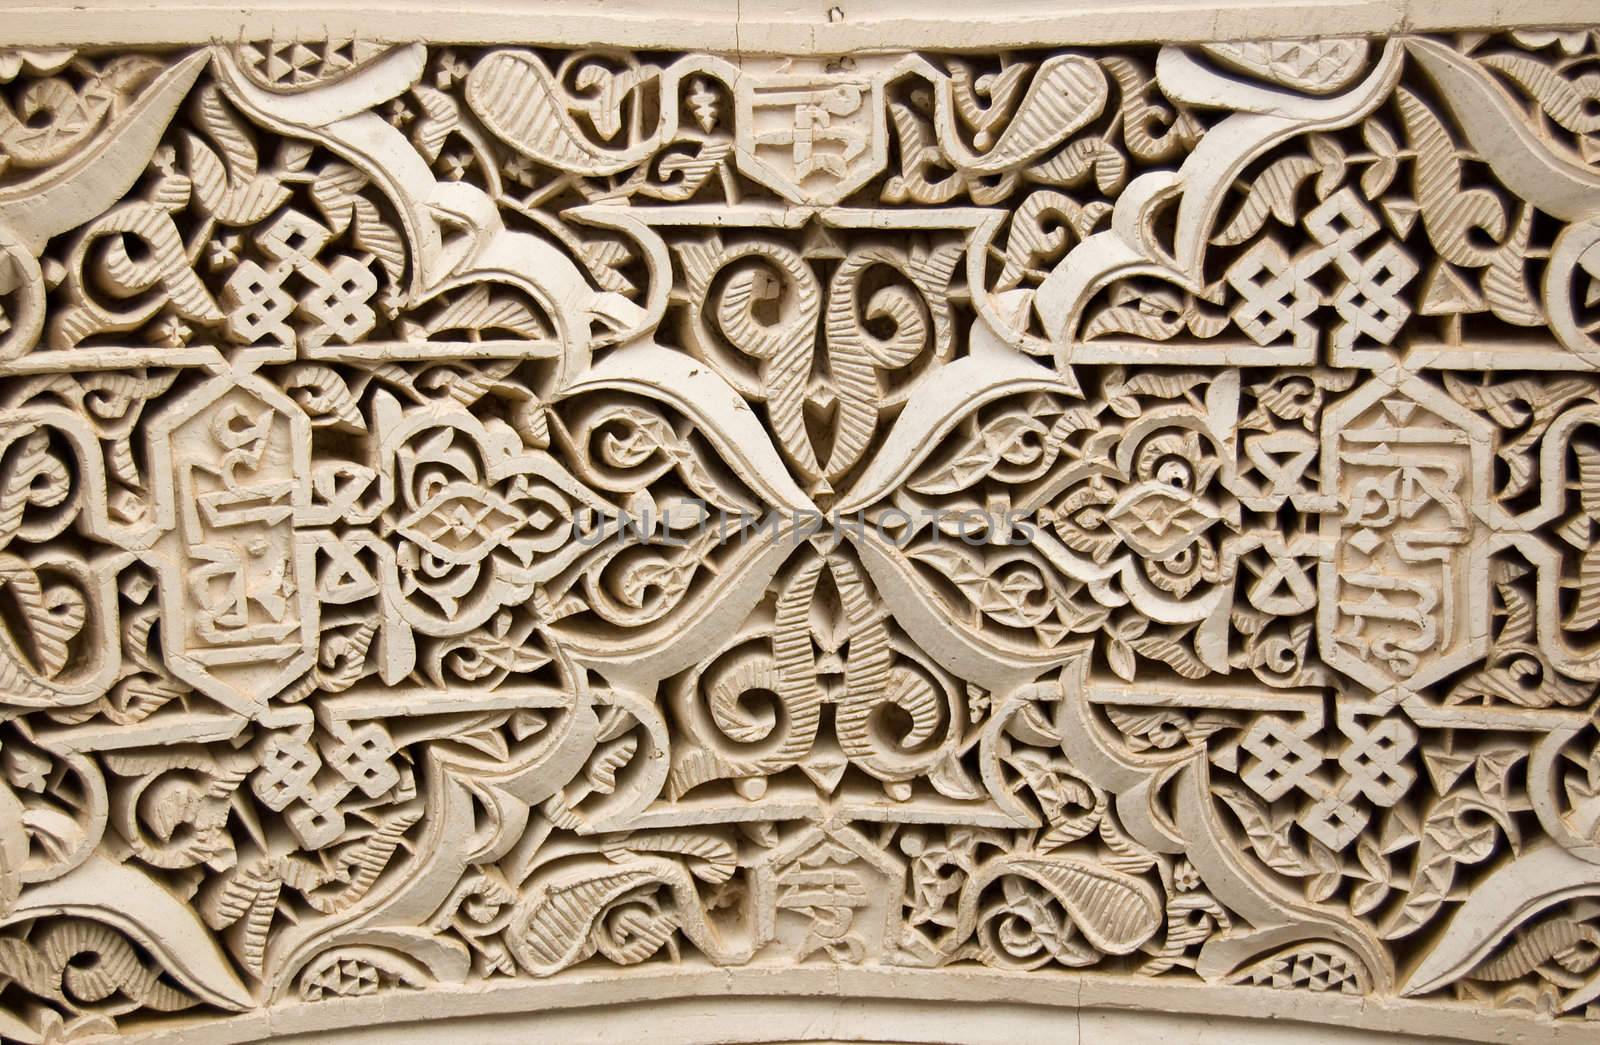 A detail of a Moorish style stucco in Marrakesh